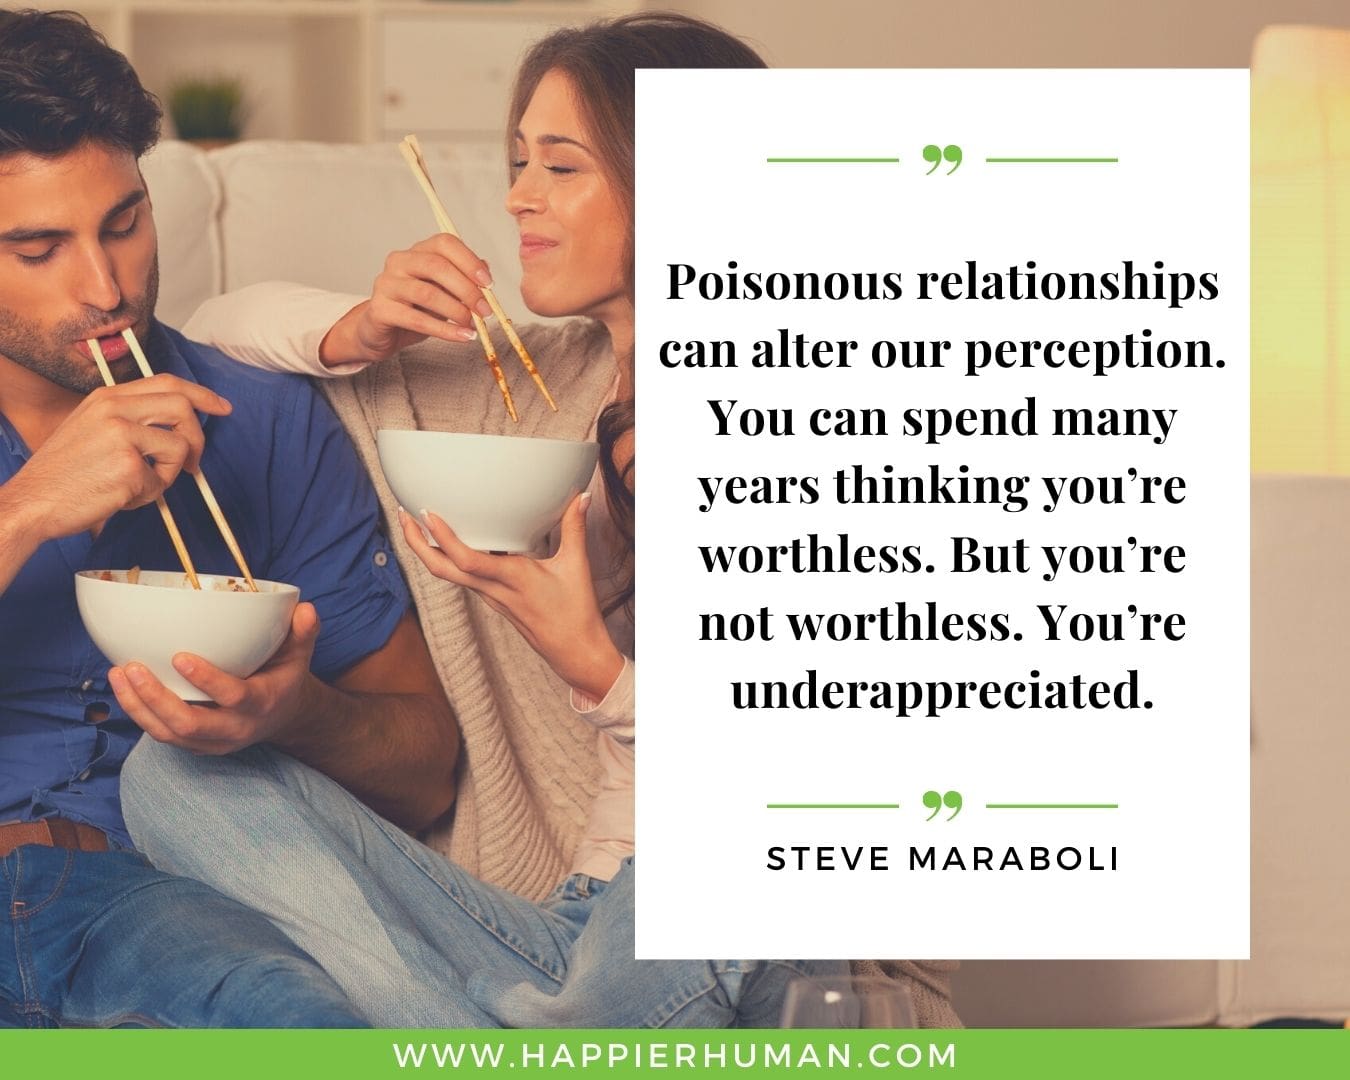 Toxic People Quotes - “Poisonous relationships can alter our perception. You can spend many years thinking you’re worthless. But you’re not worthless. You’re underappreciated.” – Steve Maraboli